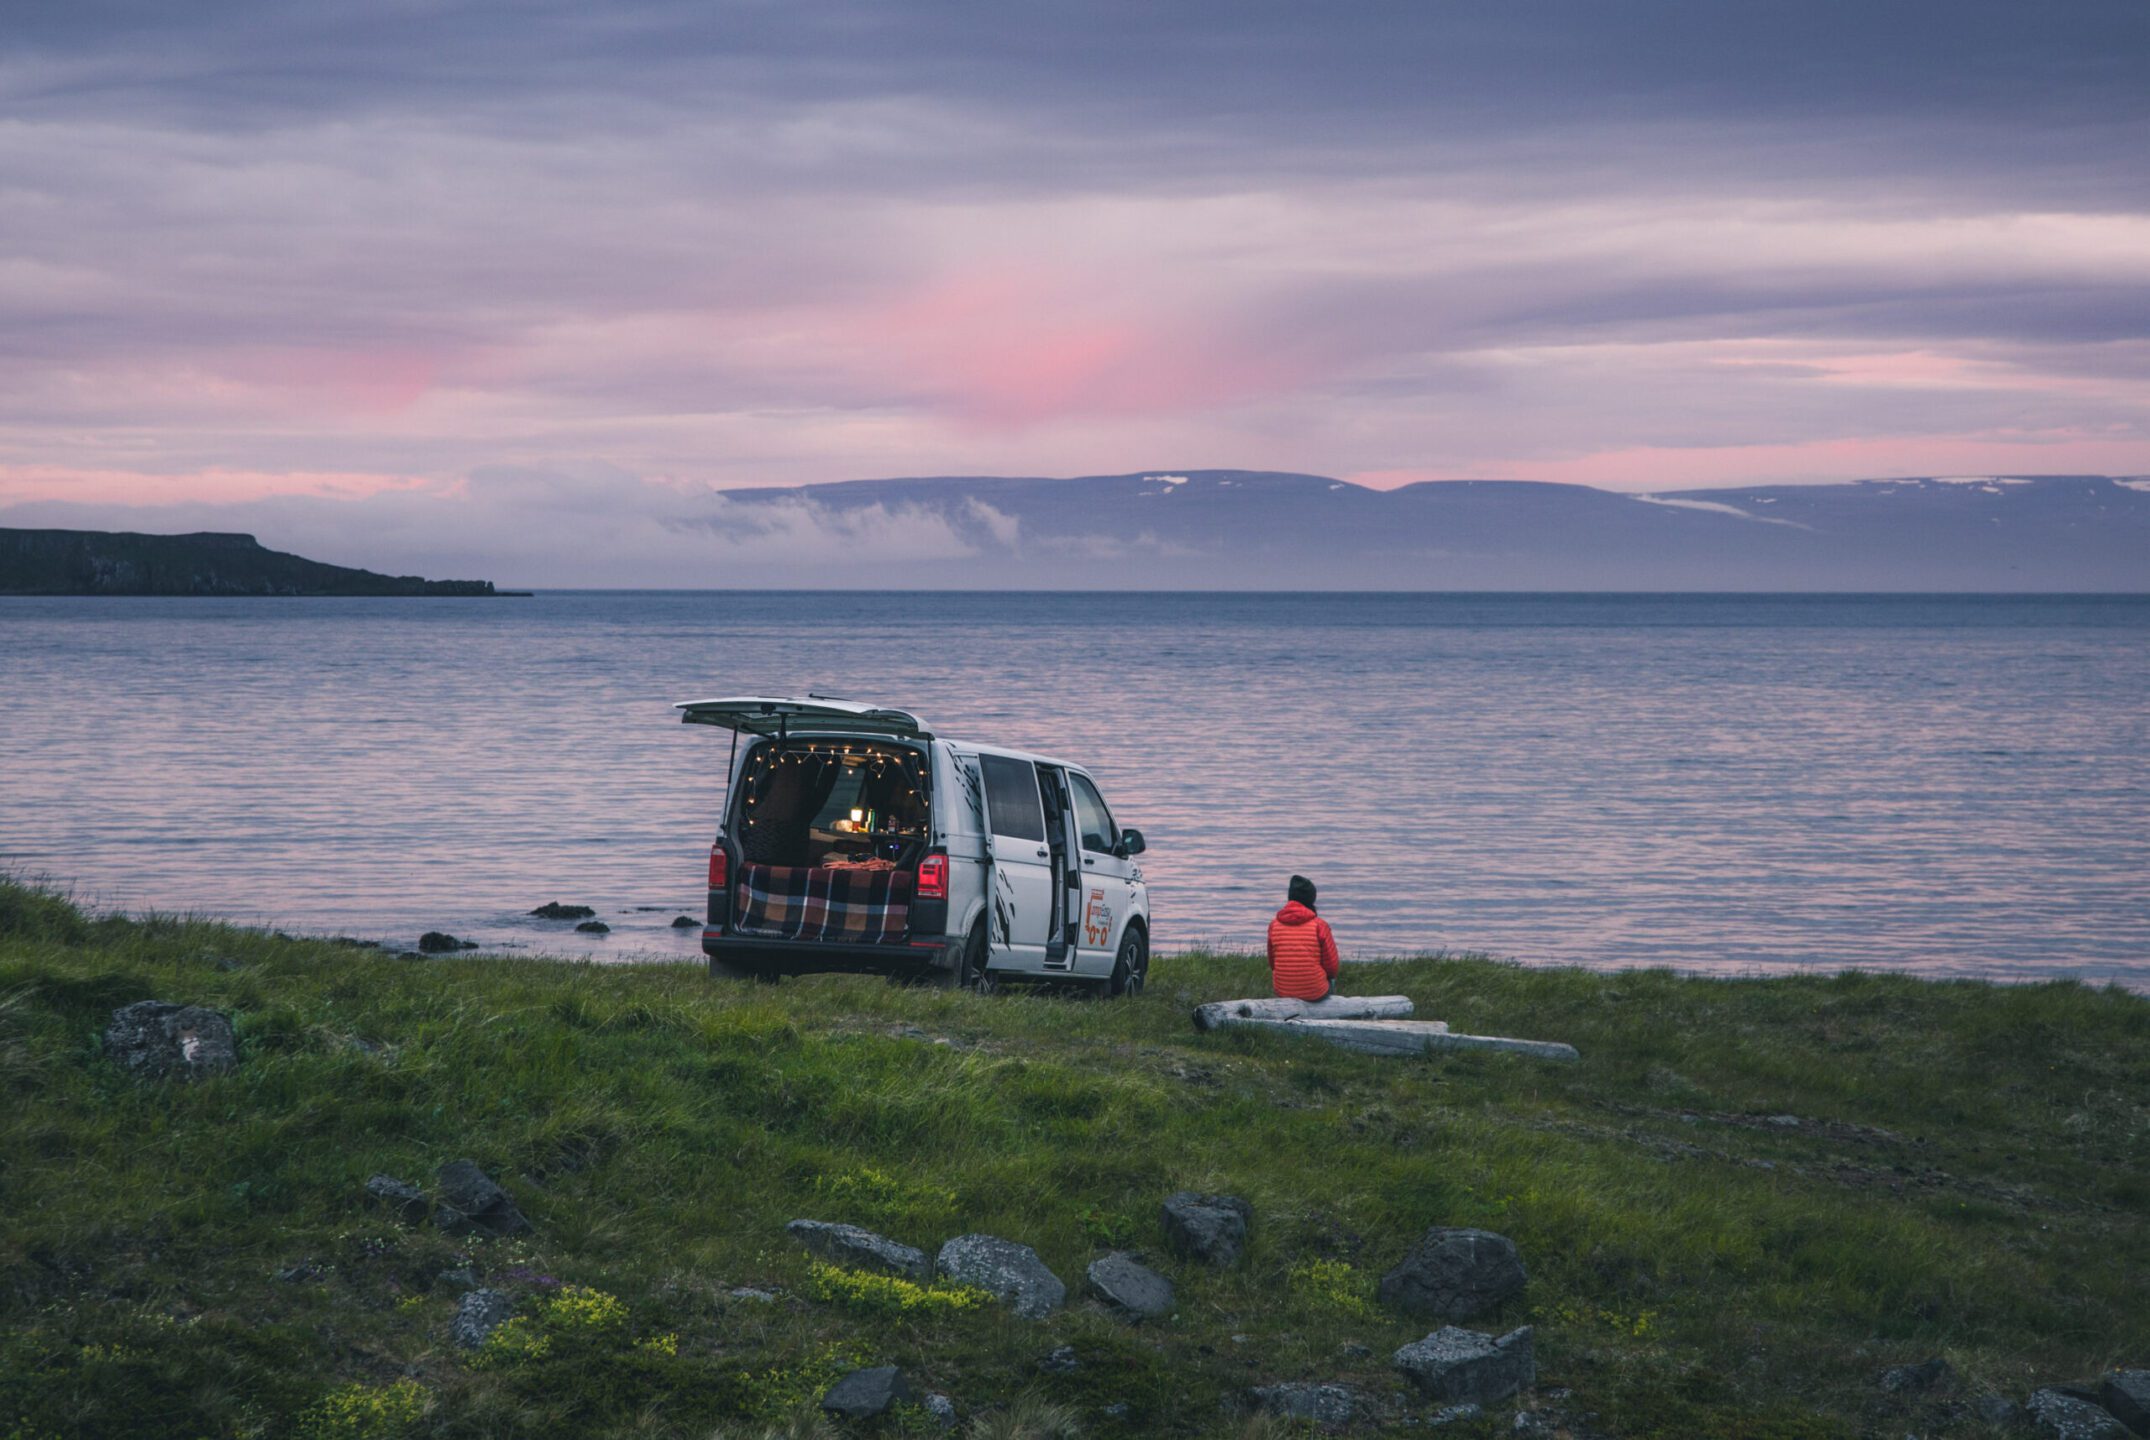 A person is sitting next to the campervan and looking at lake